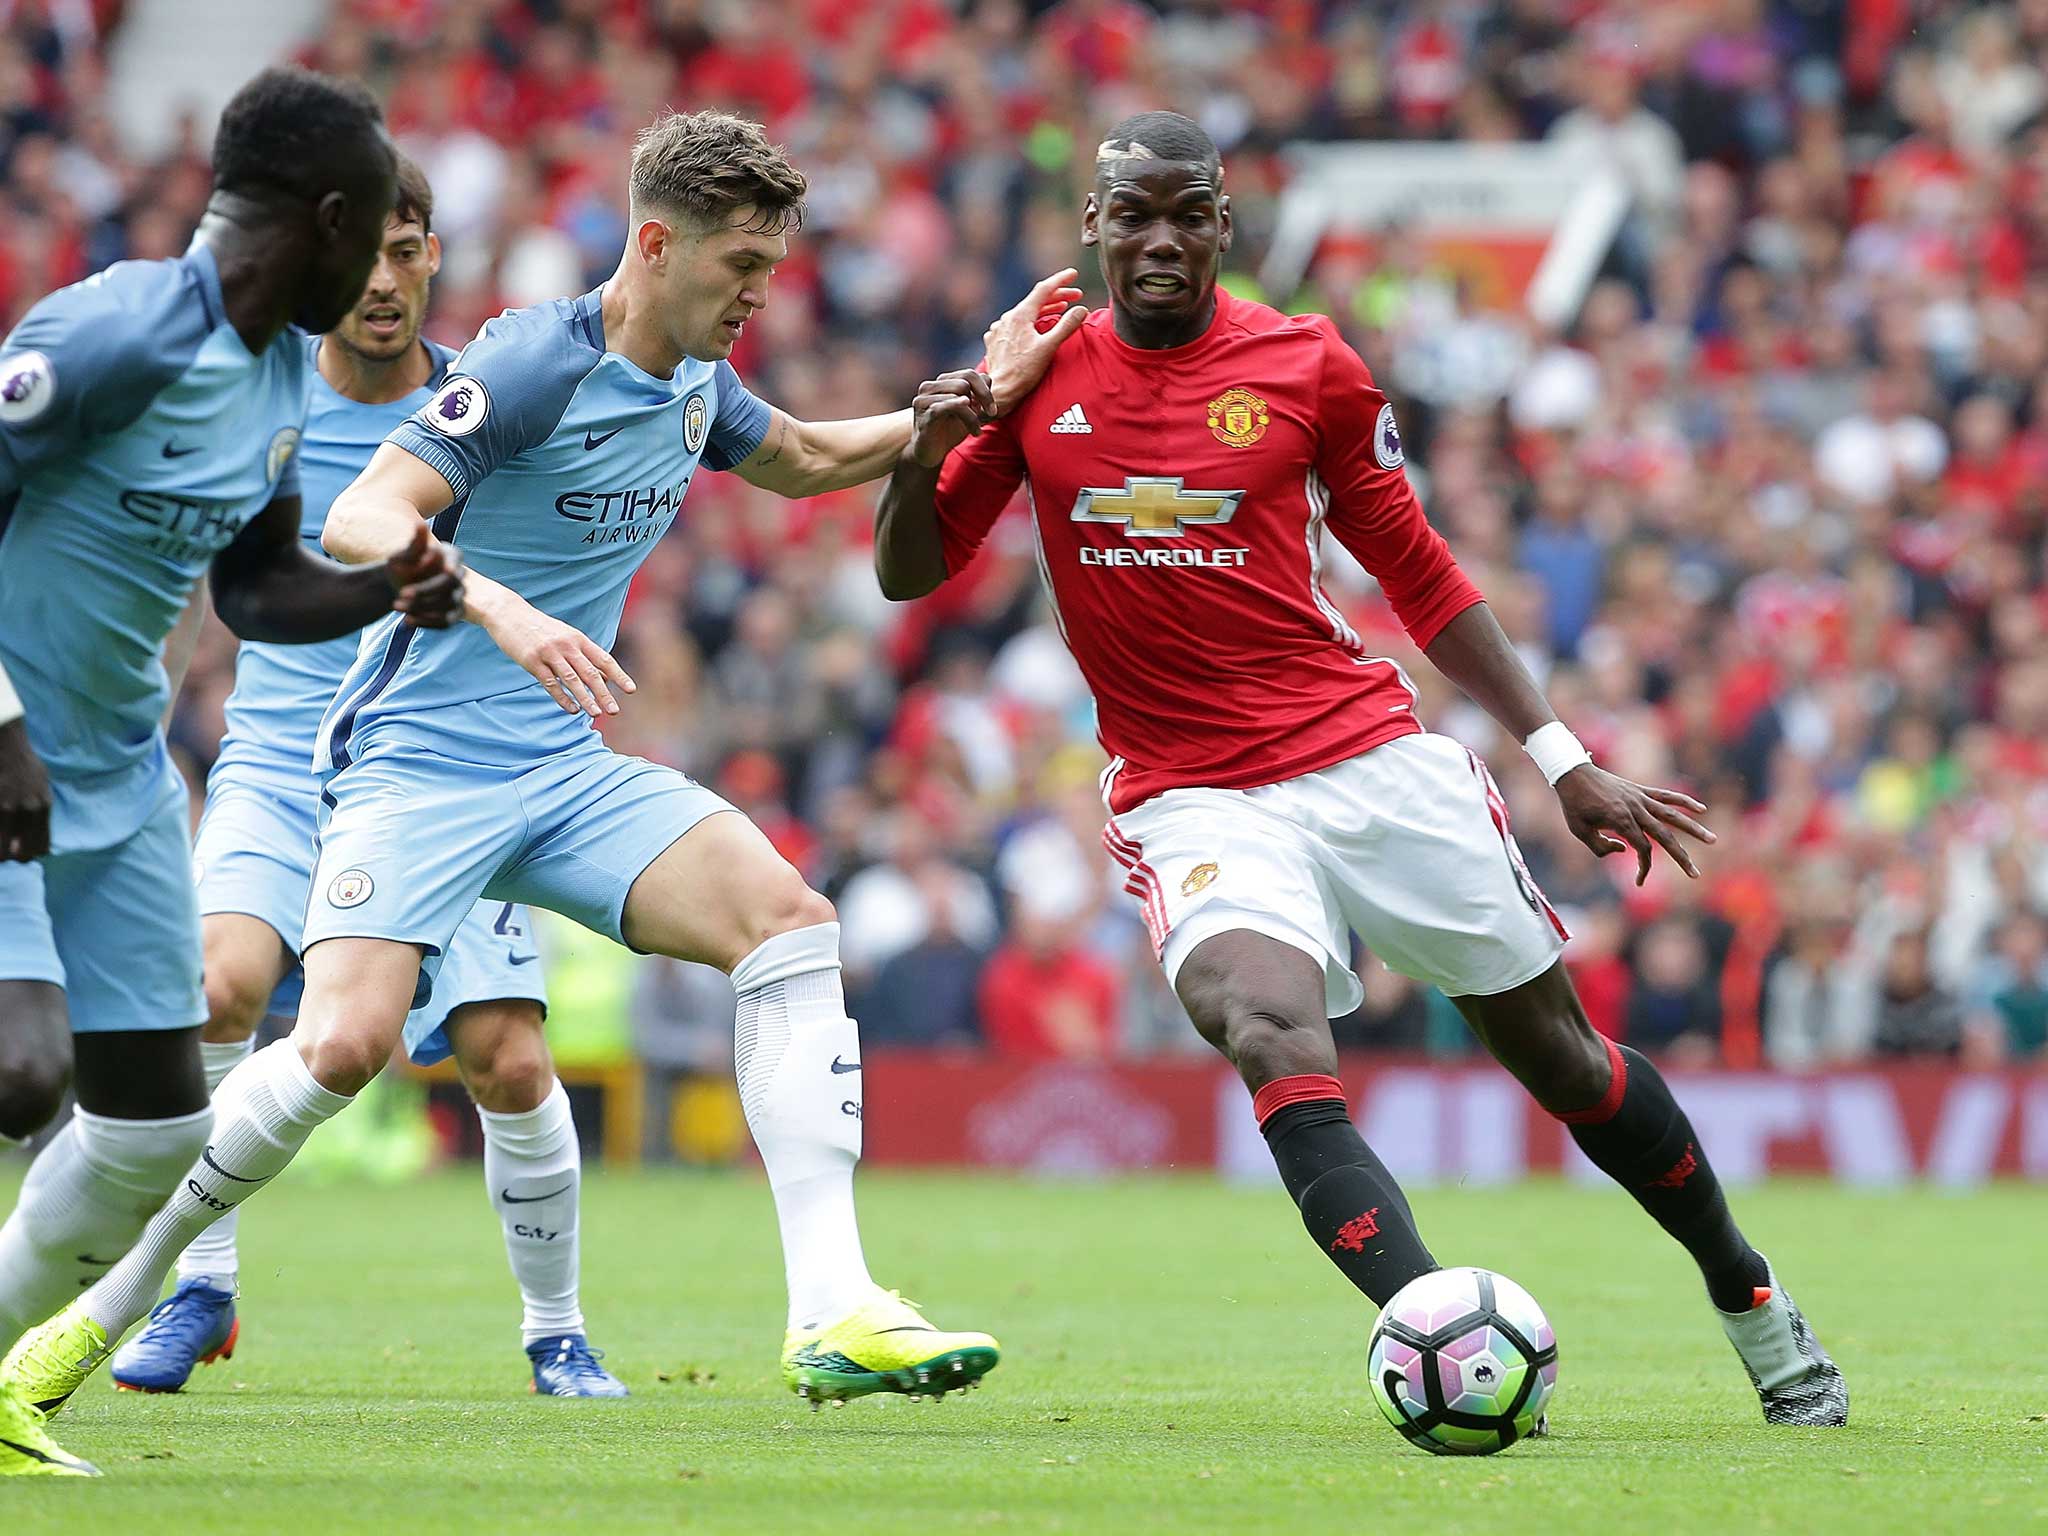 Paul Pogba endured a difficult first Manchester derby on Saturday